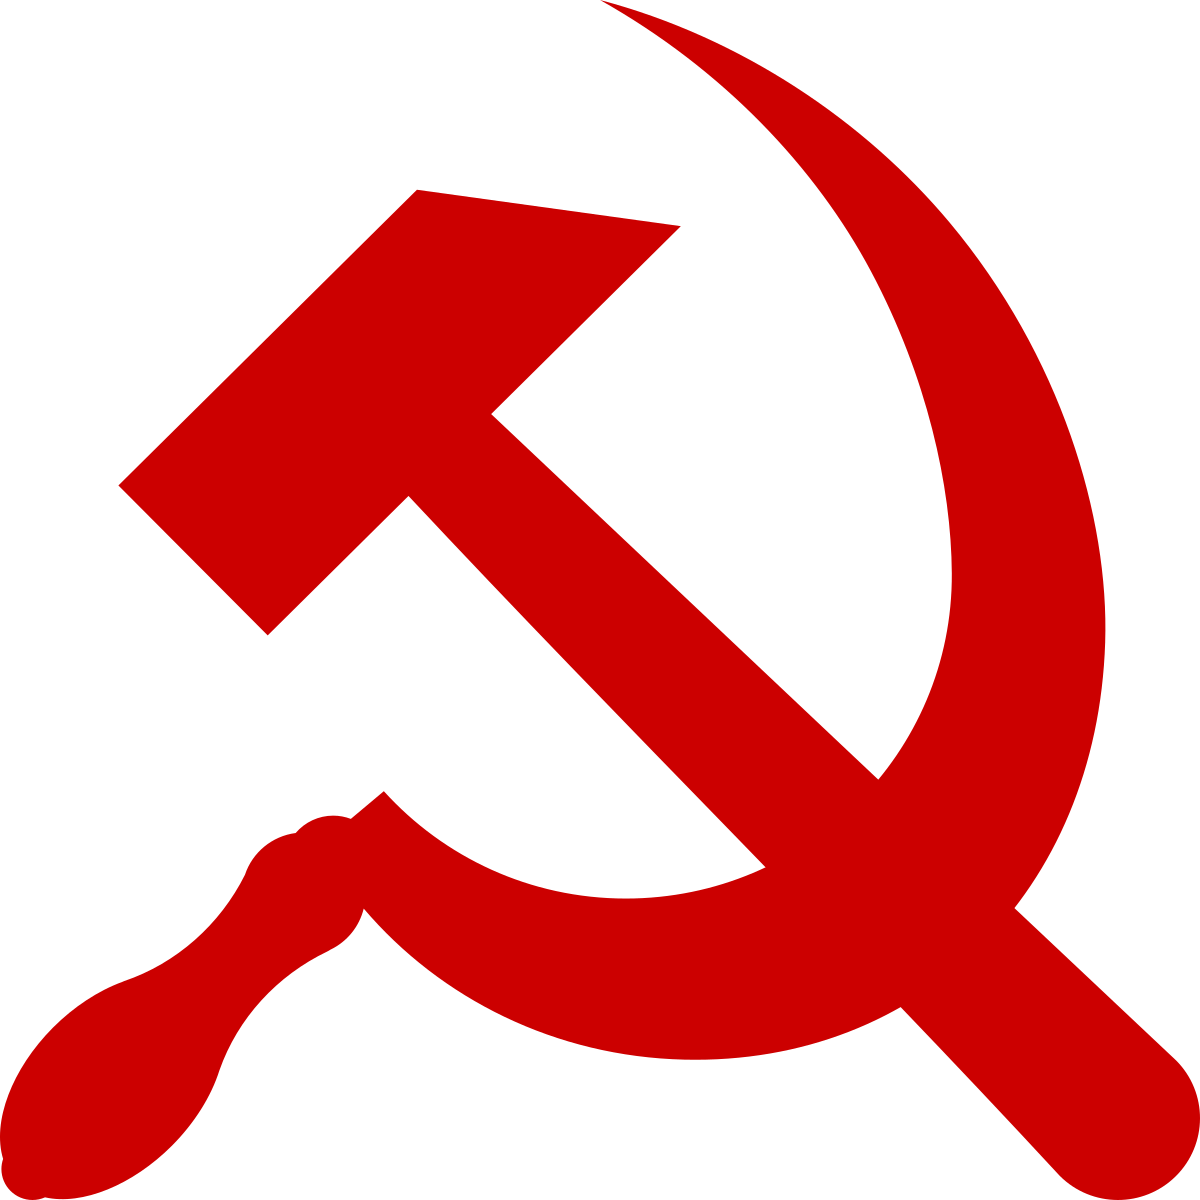 9/21There are some out there who think these dictators are "communists", because of the strong element of state control involved.